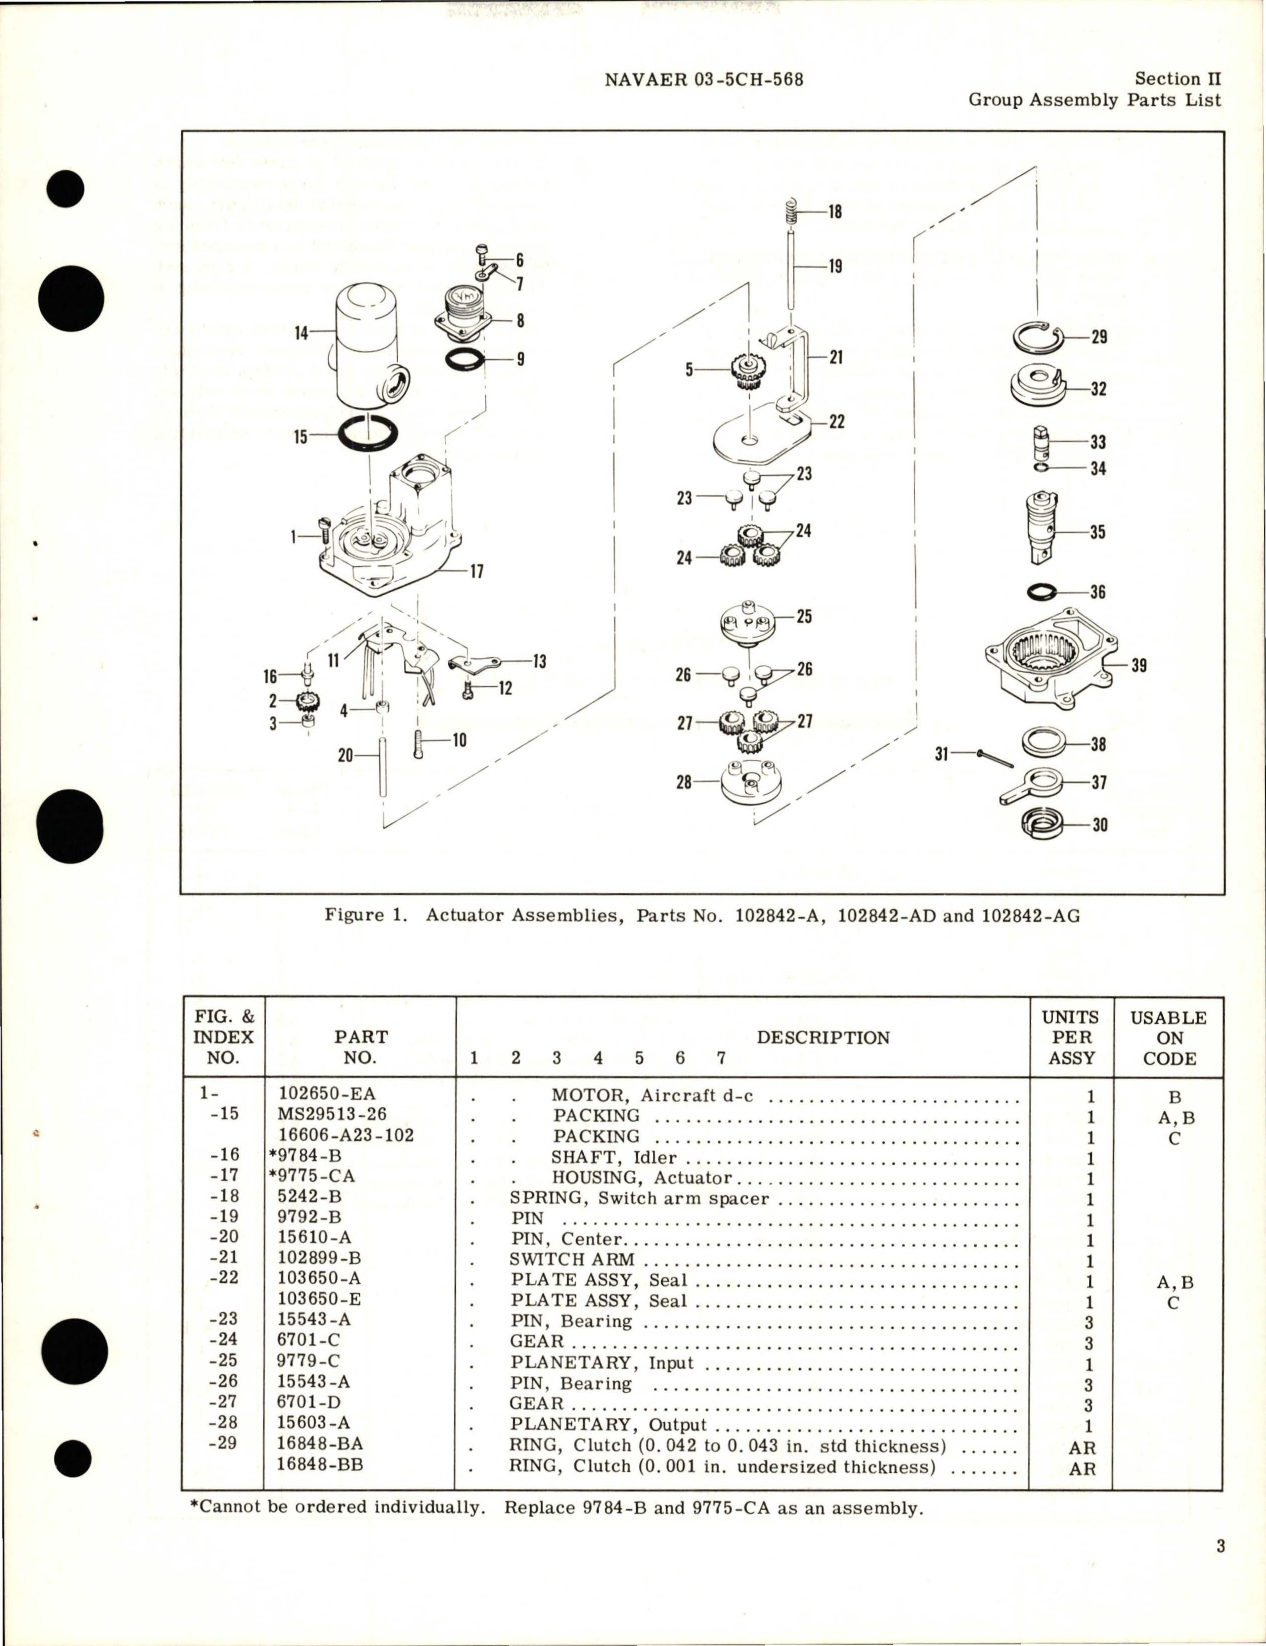 Sample page 7 from AirCorps Library document: Illustrated Parts Breakdown for Actuator Assy - Part 102842-A & Similar Parts 